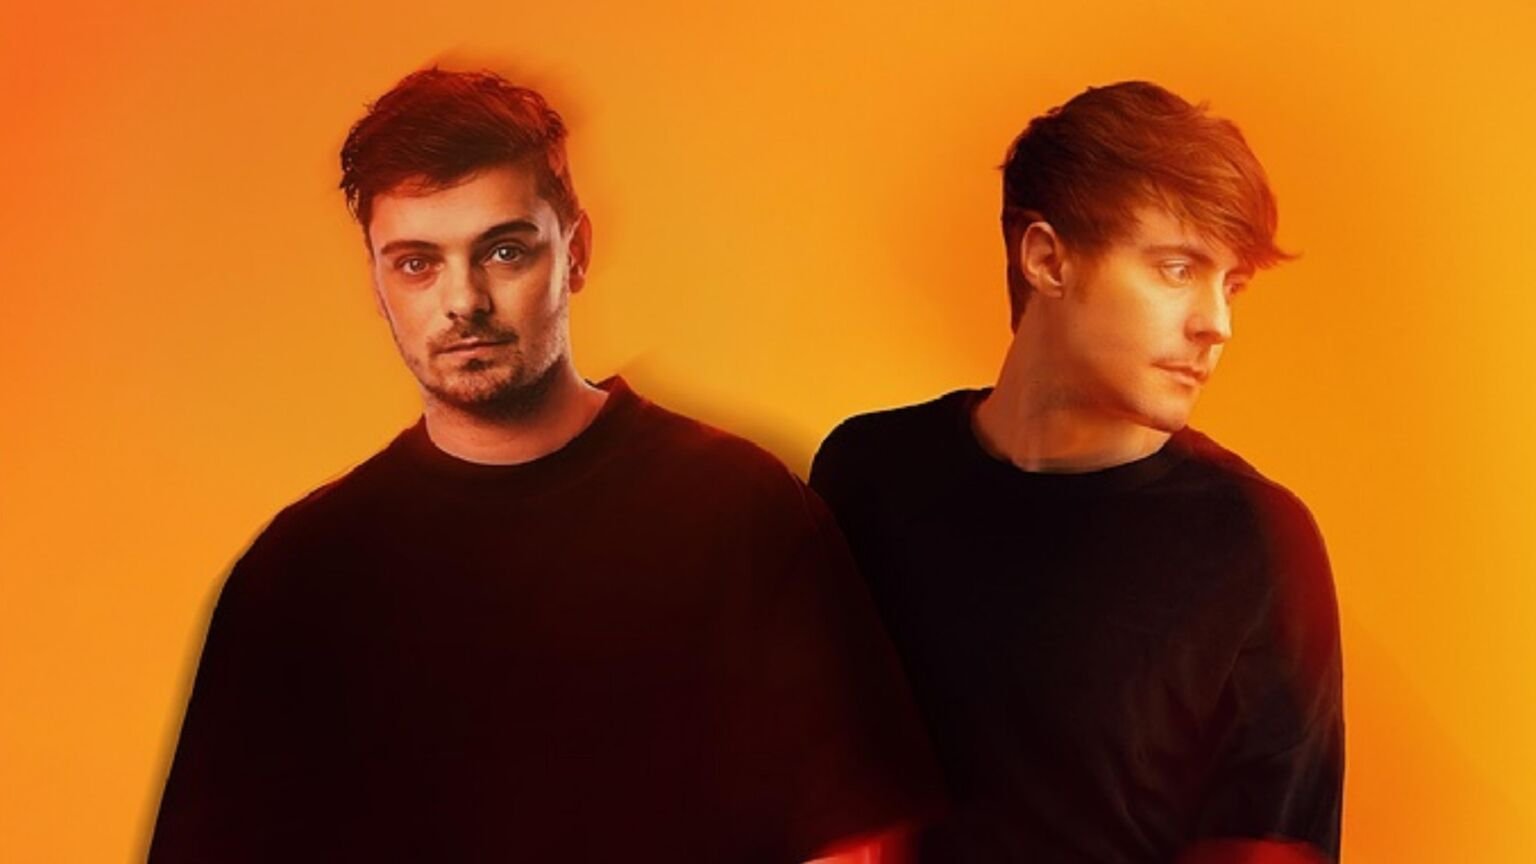 Martin Garrix And DallasK Team Up with Singer-Songwriter Sasha Alex Sloan On Hypnotic New Single, "Loop,"